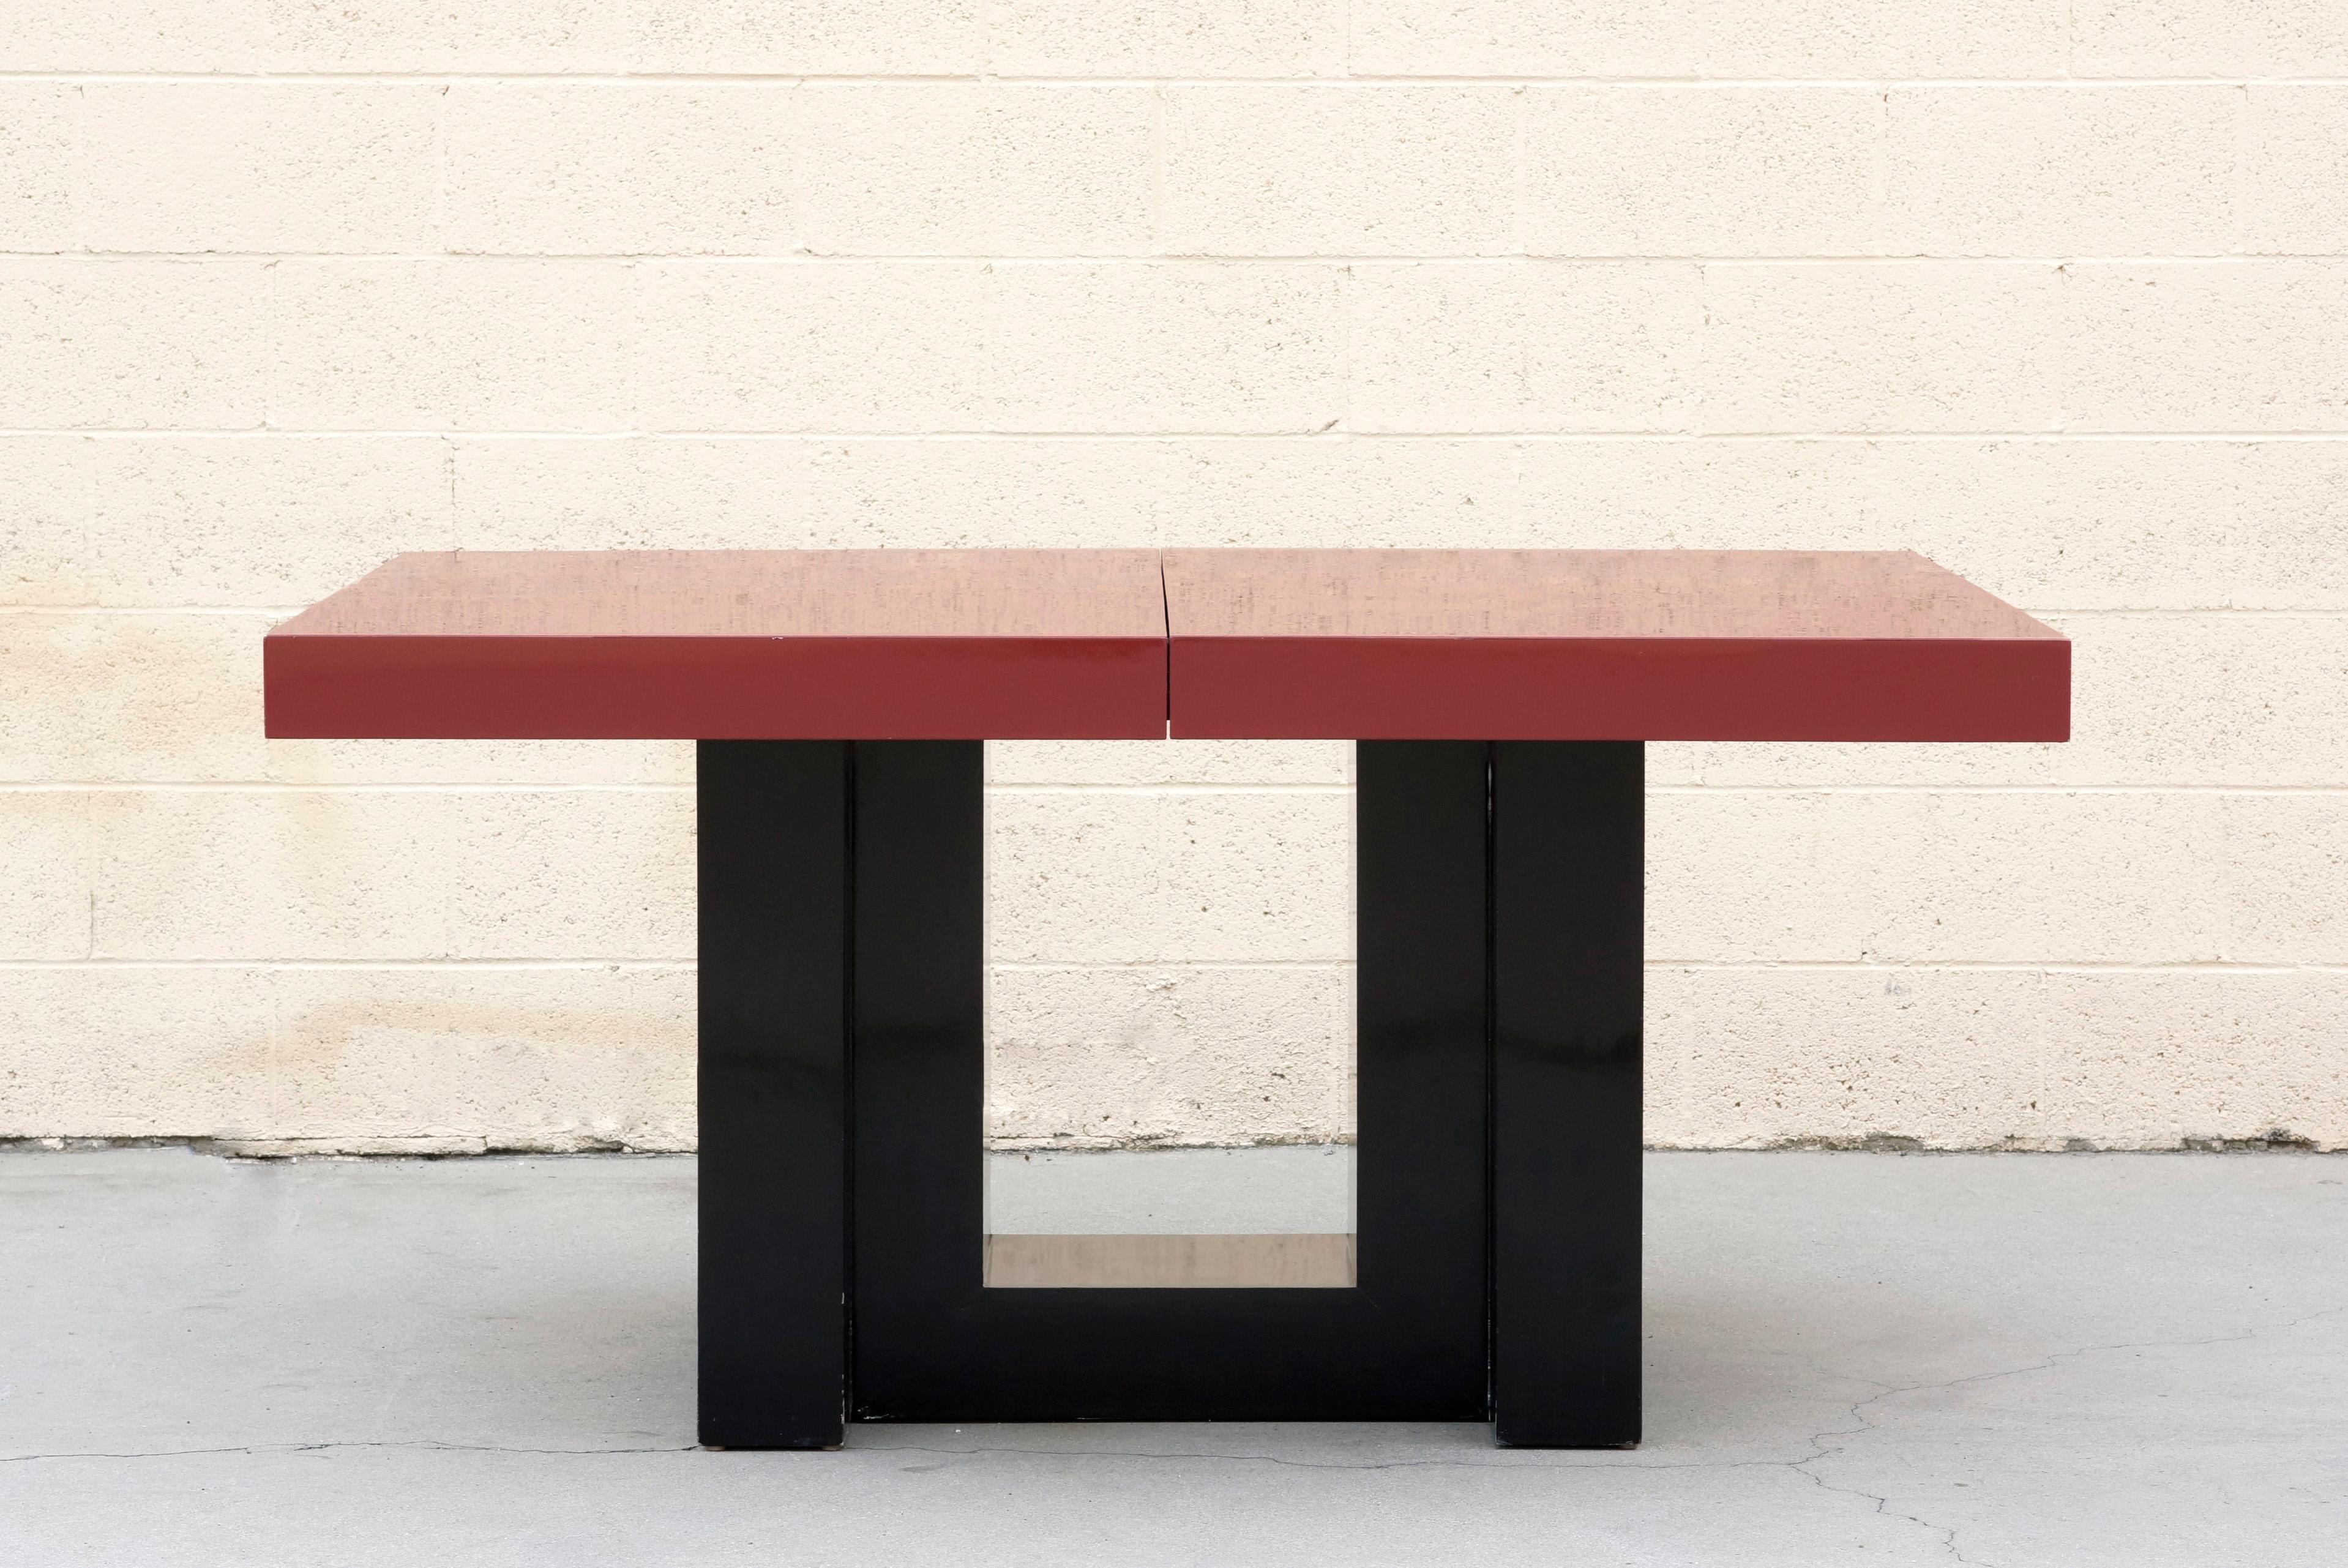 Beautiful Art Deco dining table designed by Paul Laszlo, 1940s. Oversized expanding top and sculptural base in a two-tone black and maroon lacquer finish. Includes two leaves at 14